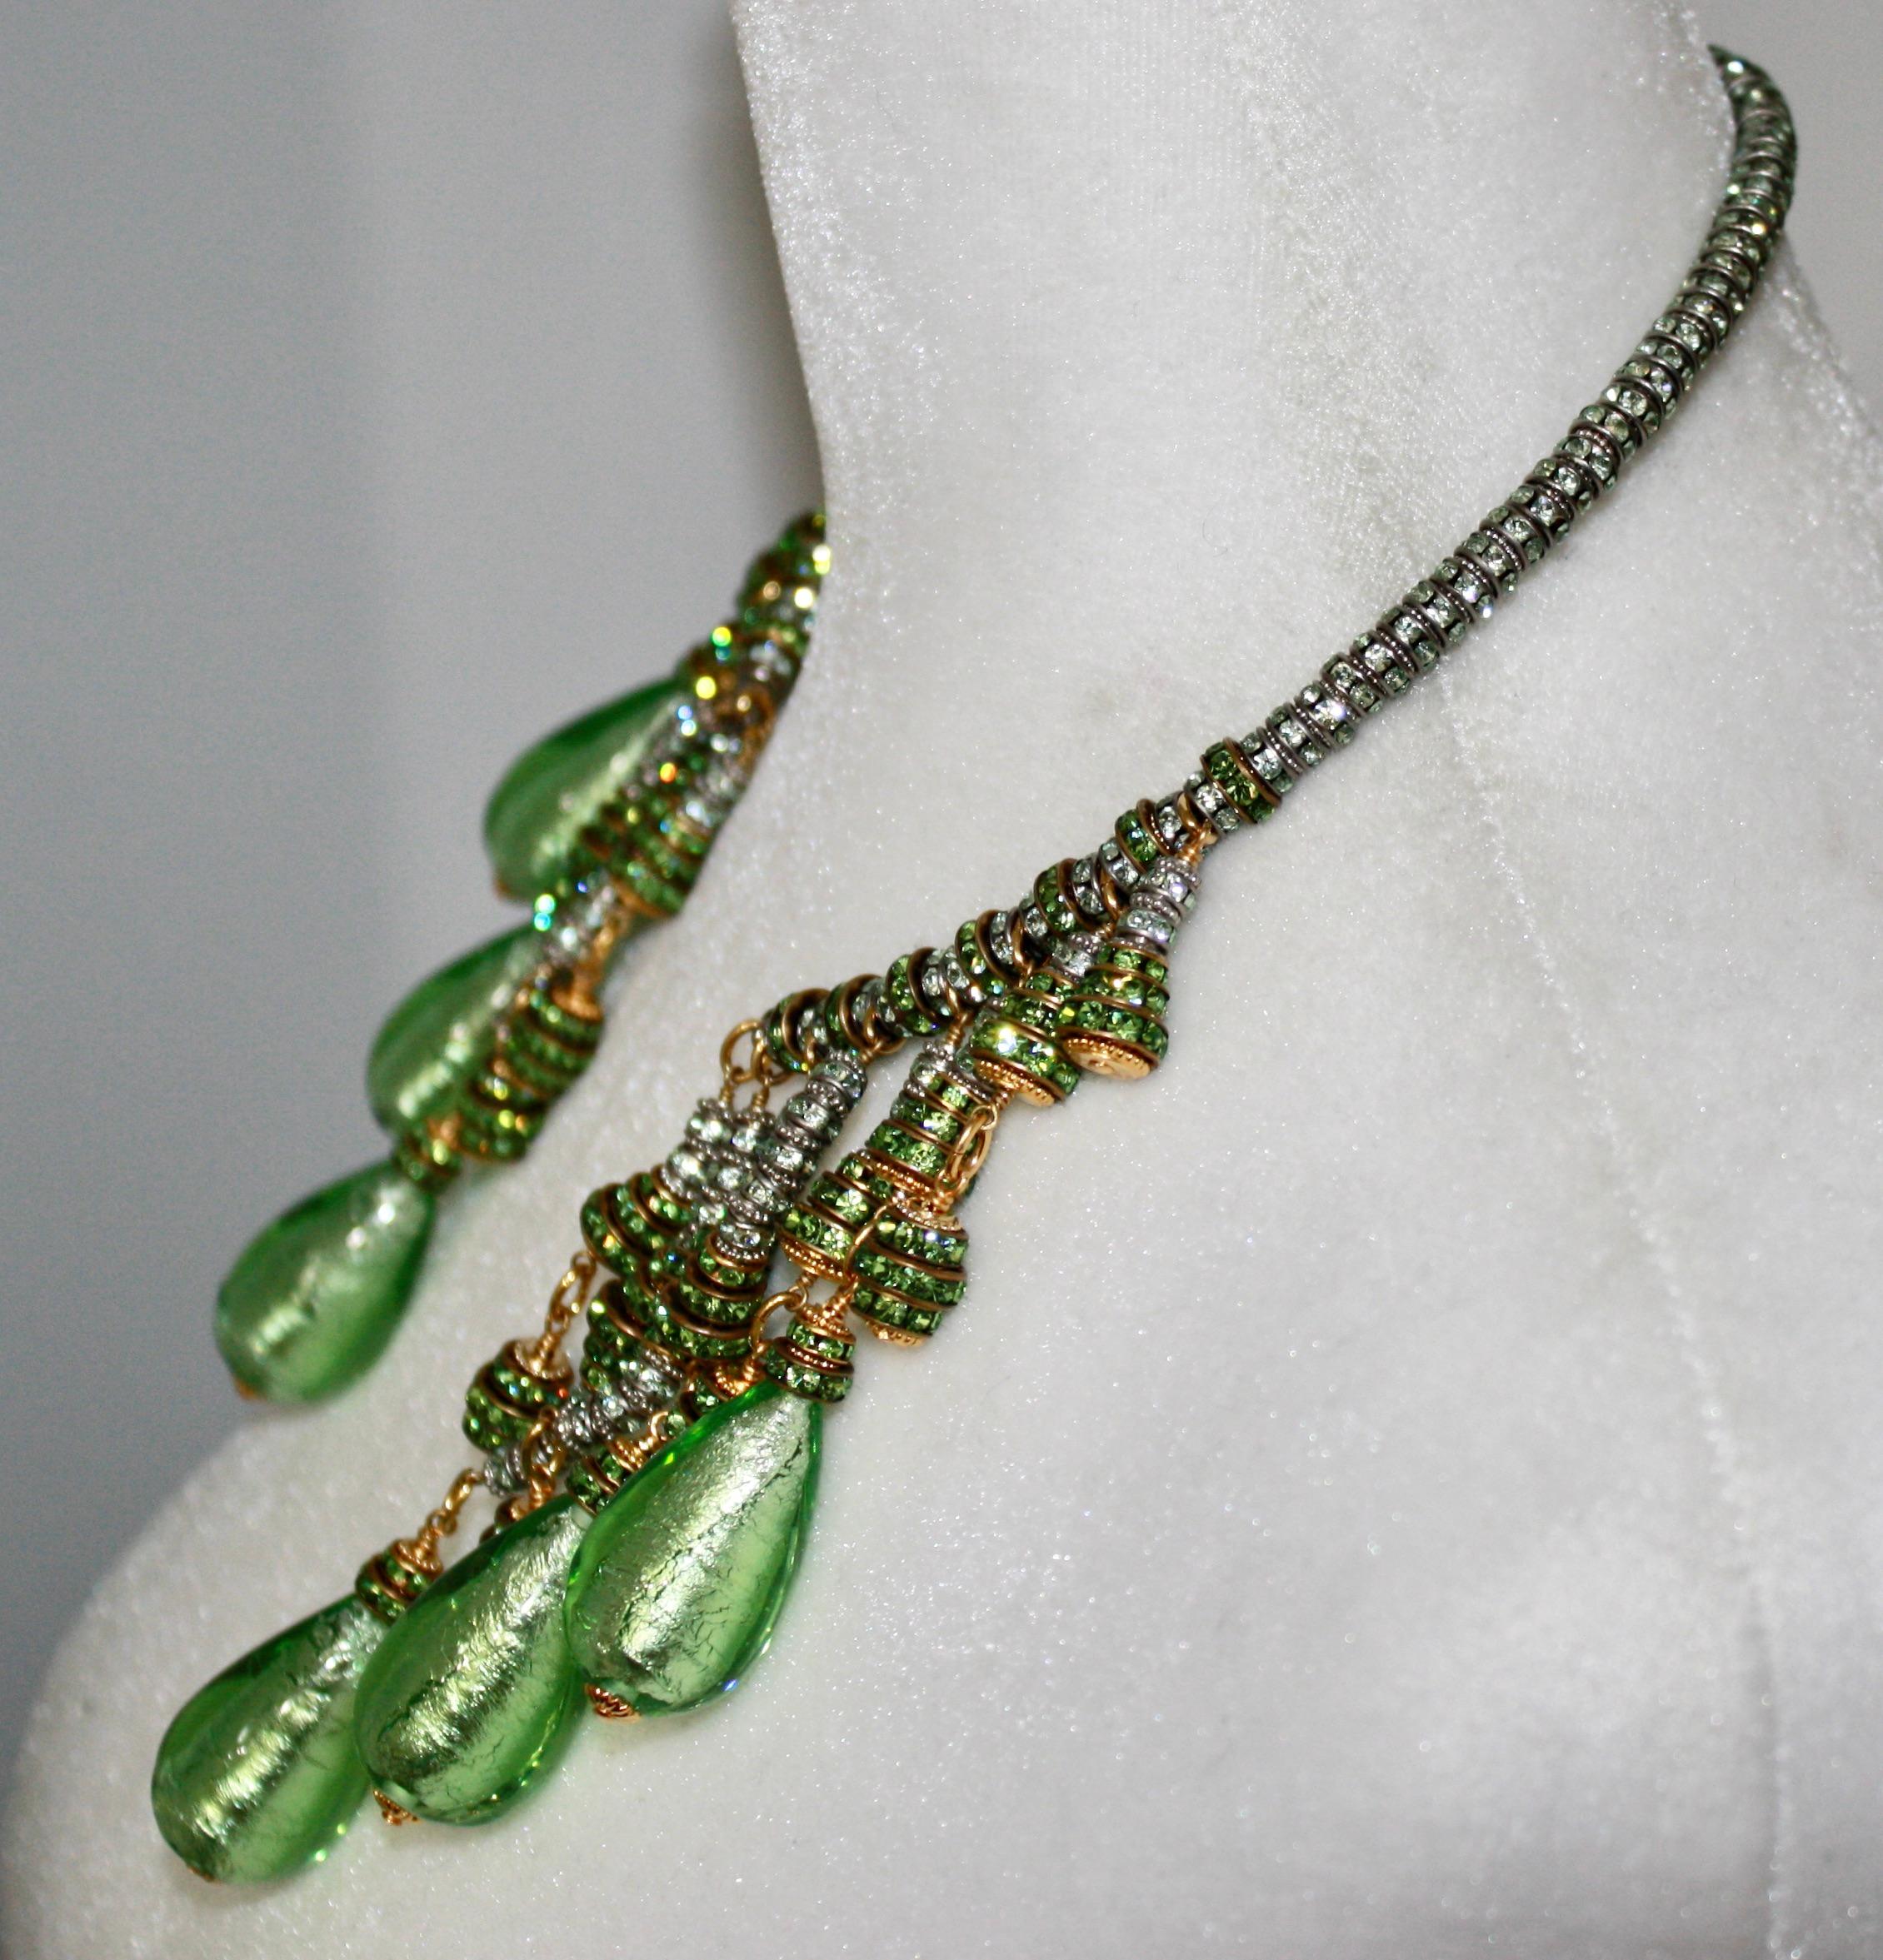 A wraparound Swarovski Crystal rondelle choker in green with drops and 6 unique bright green  Murano pear shape drop.
One of a kind.
Drops are 2”x1.5”